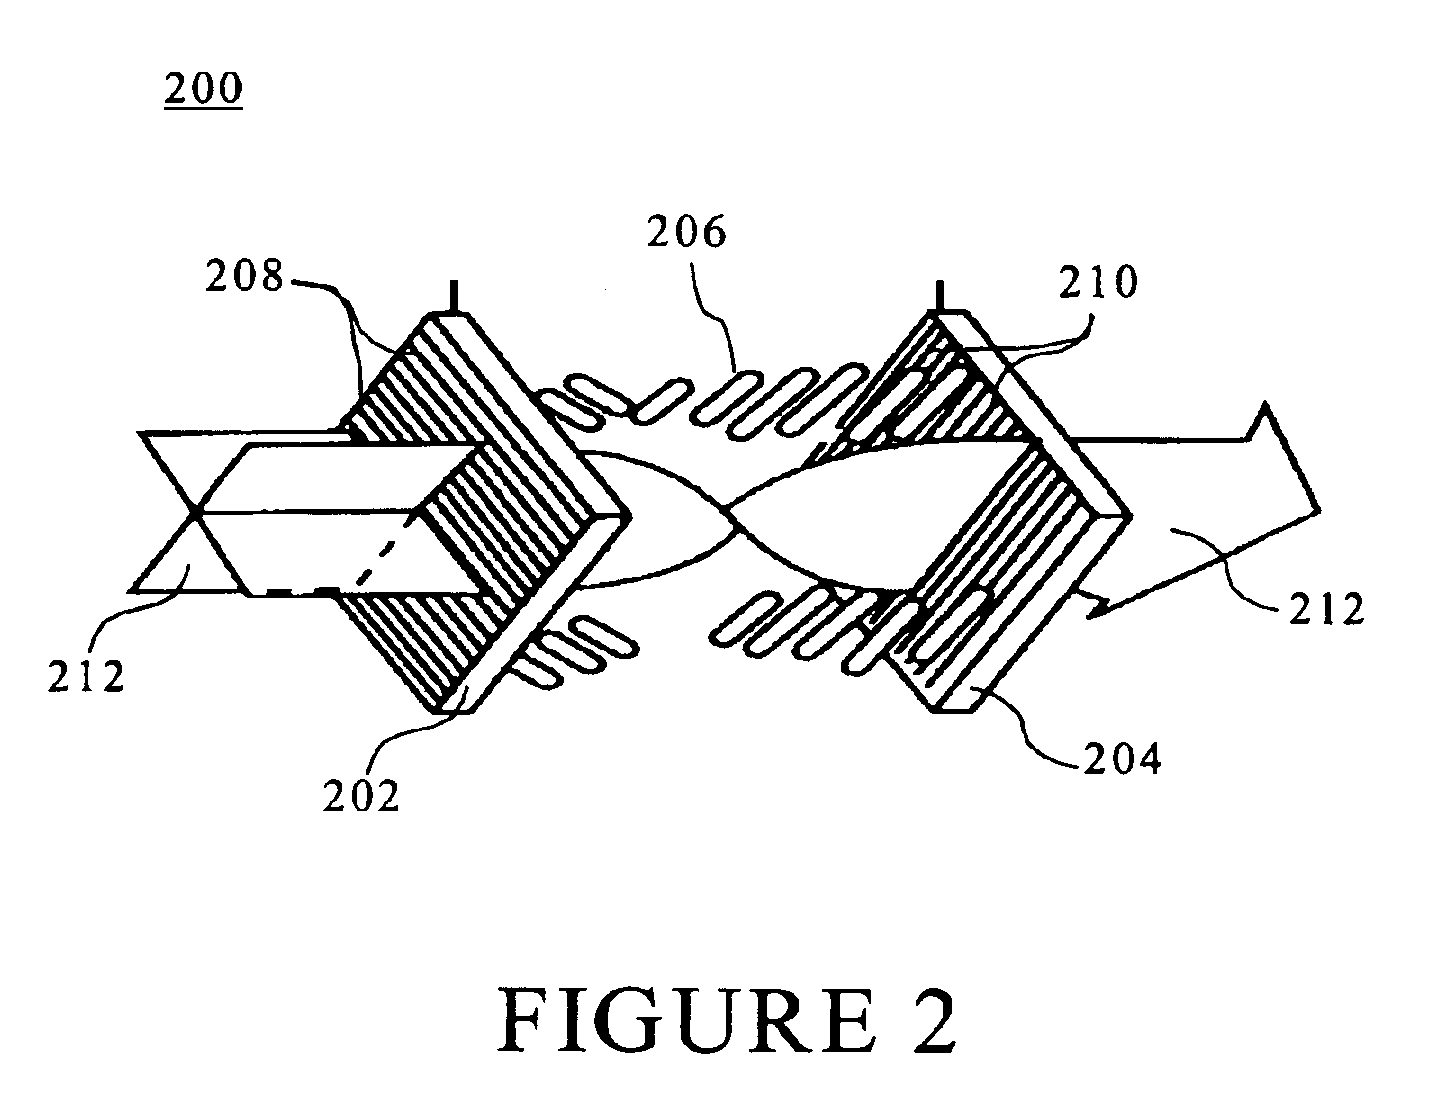 Scannable barcode display and methods for using the same